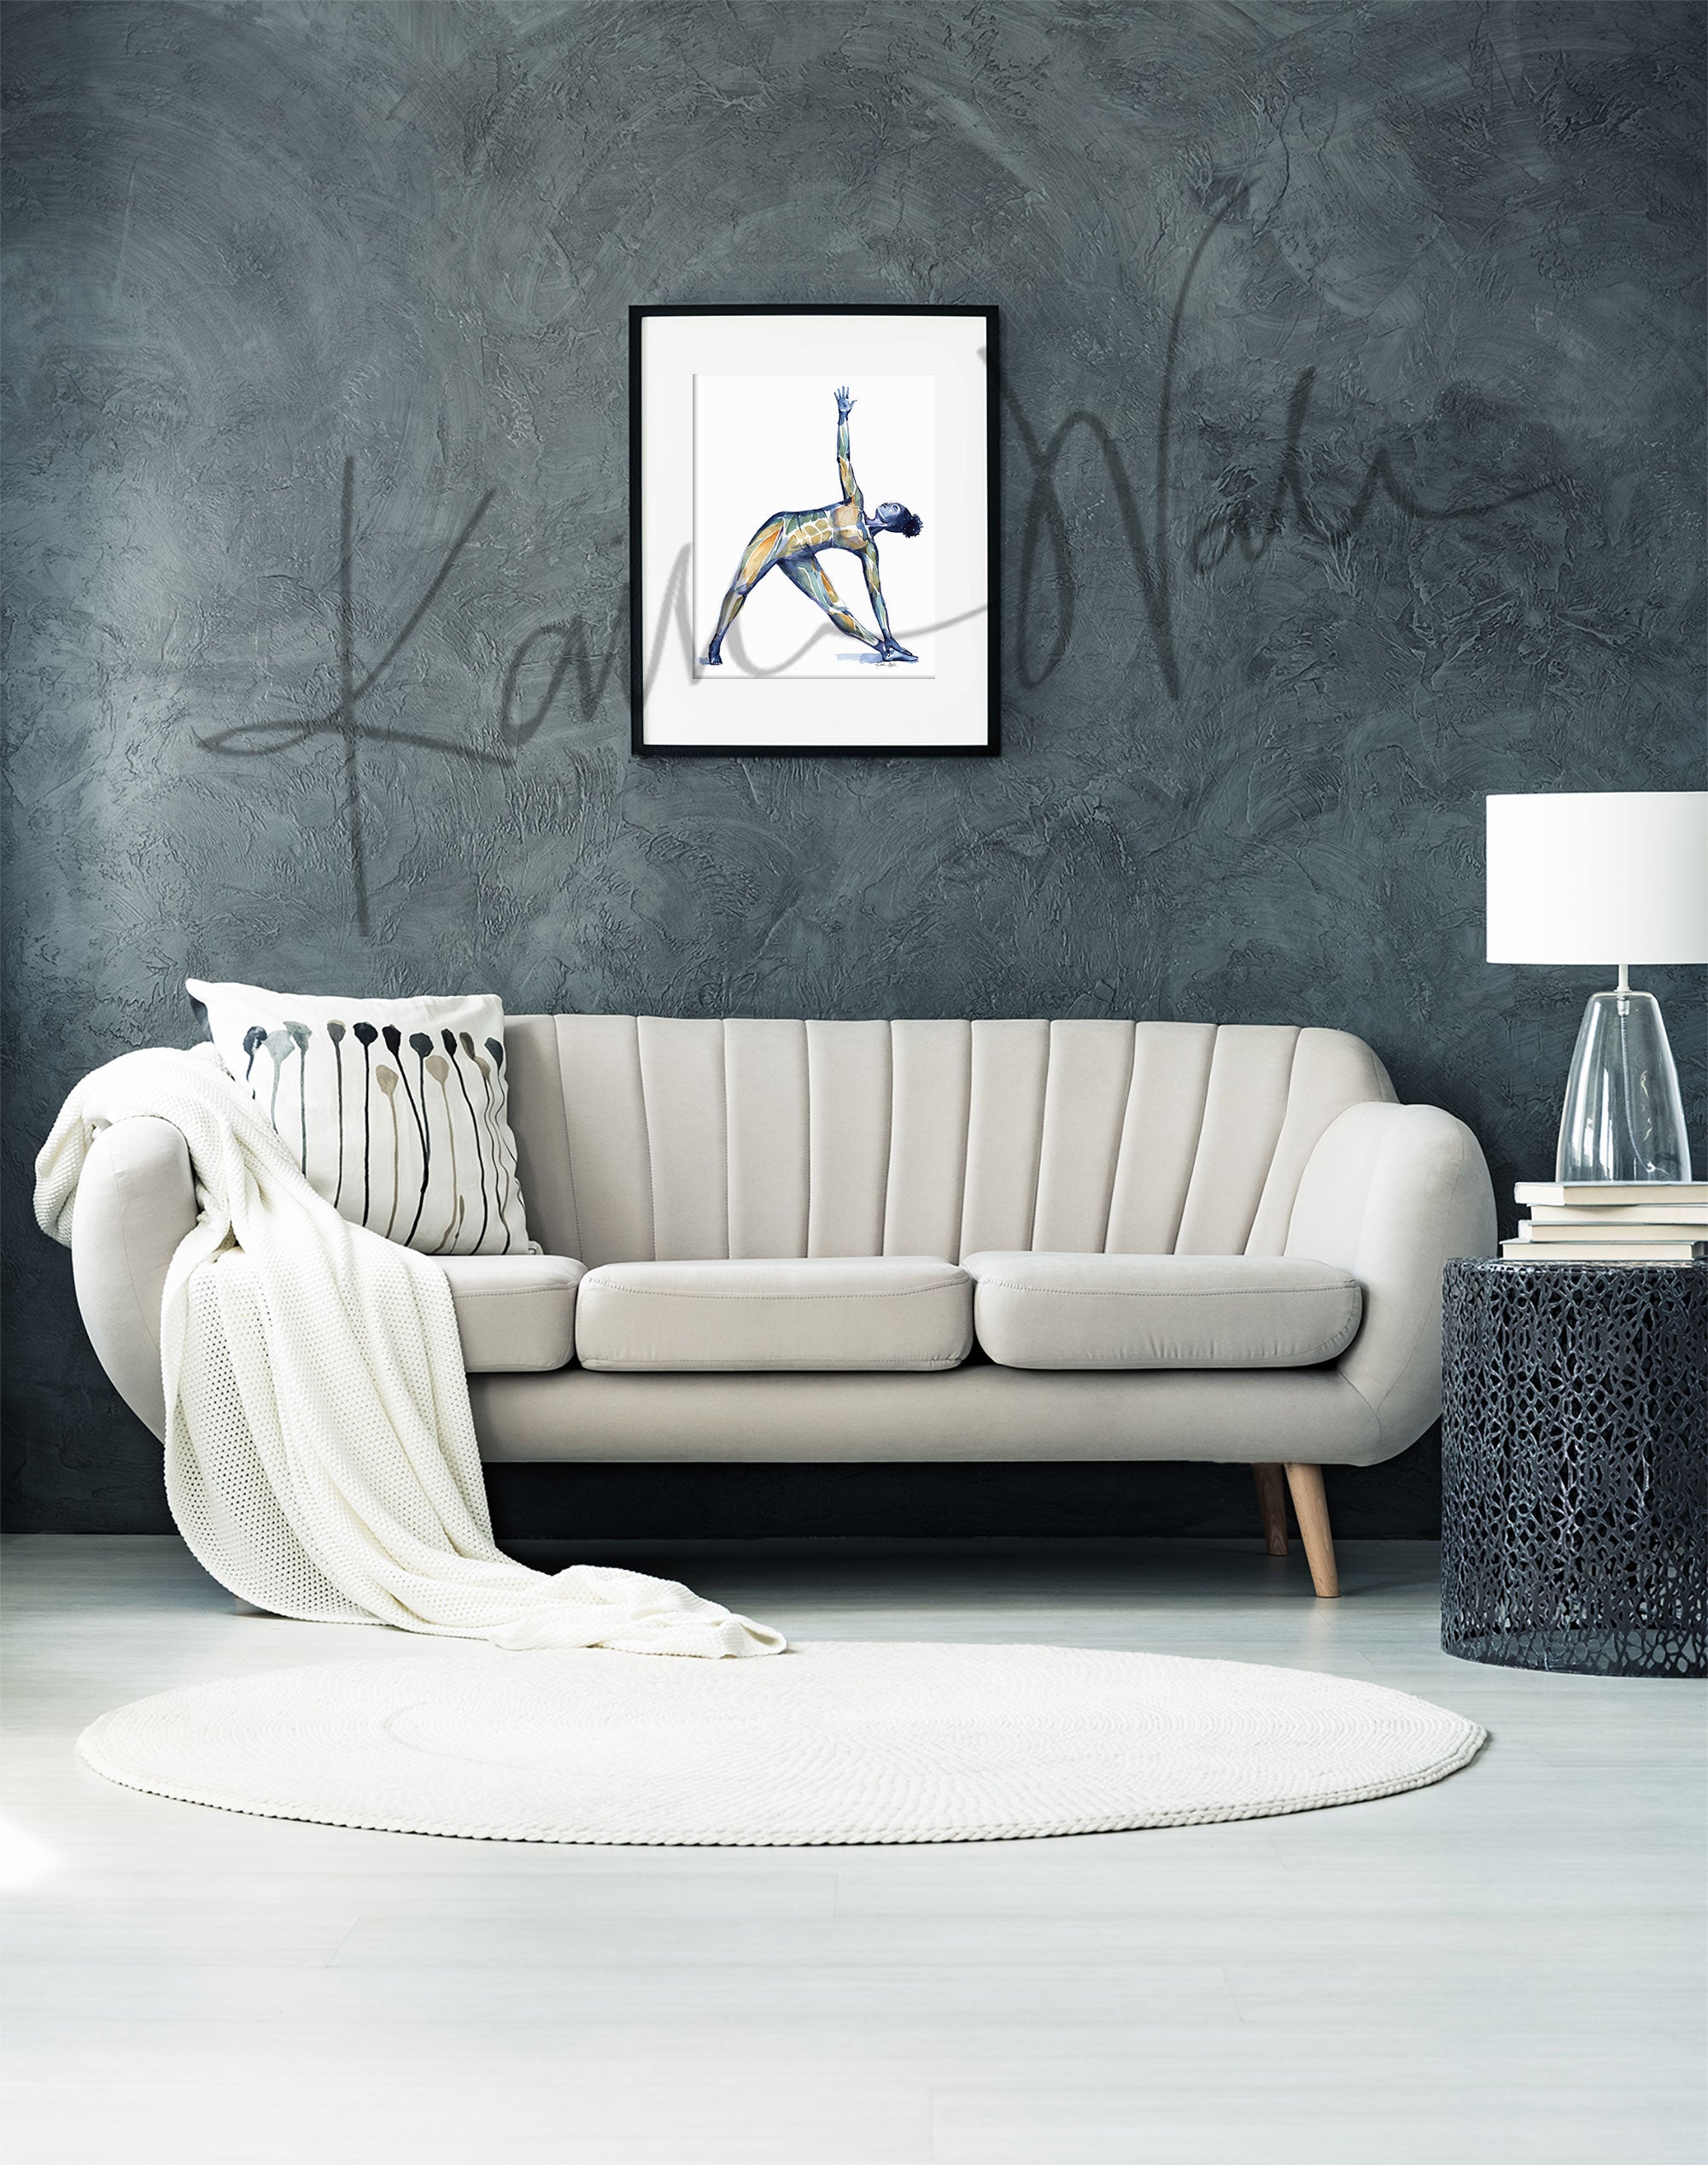 Framed watercolor painting of a woman doing a triangle yoga pose with her muscular system showing beneath her skin. The painting is hanging over a white couch.